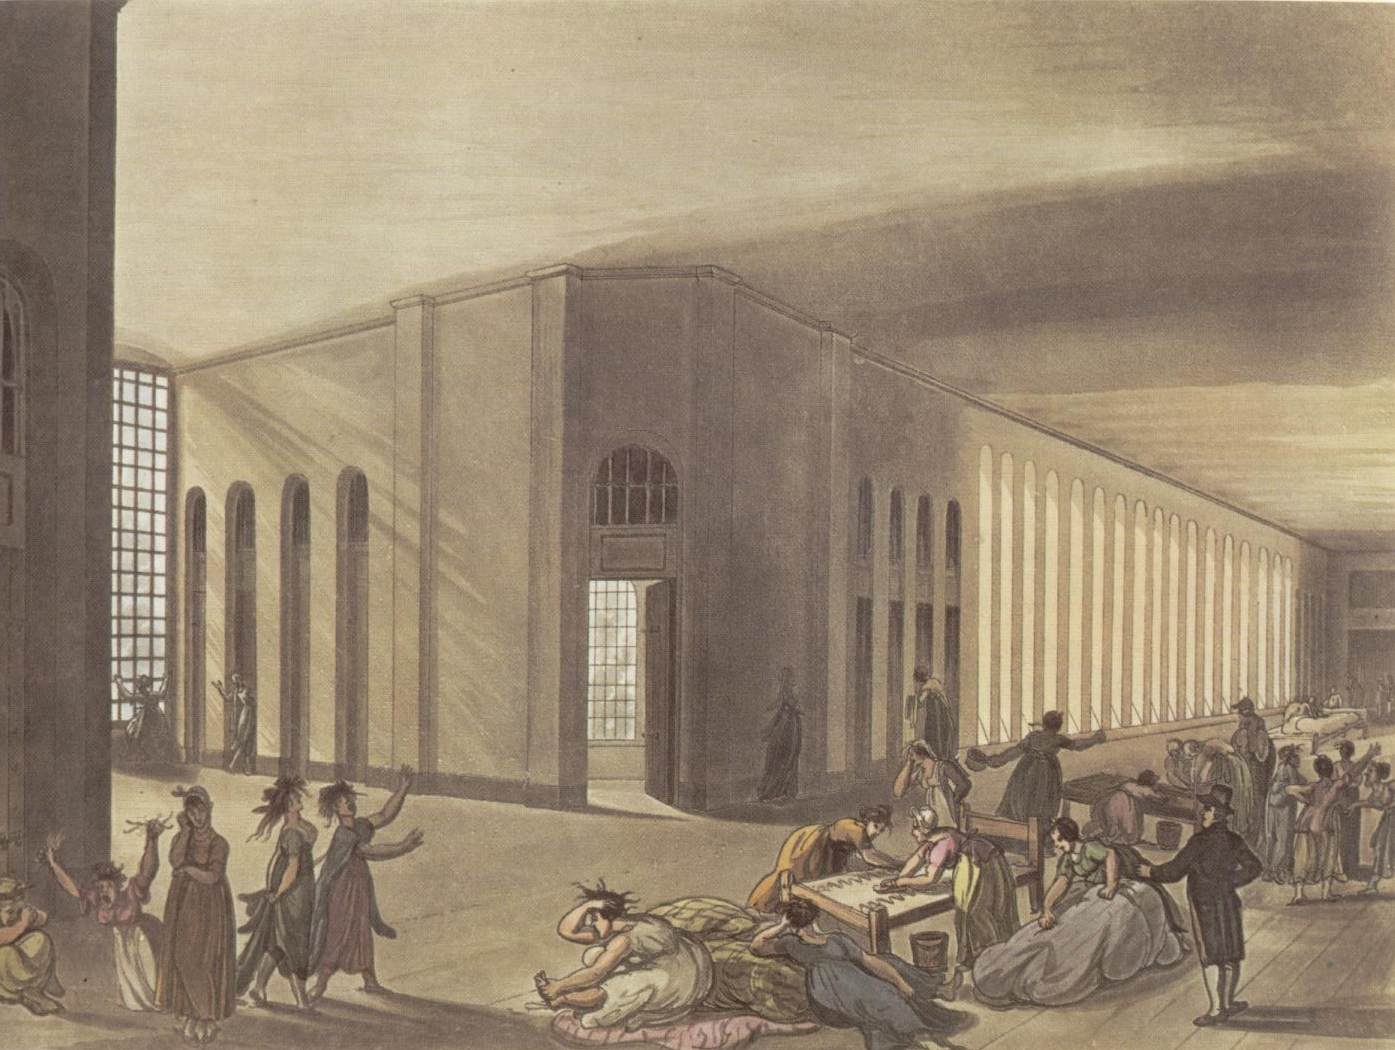 A large room lit from windows on the left.  Several female figures in the foreground can be seen waving their arms and pulling their hair - signs of mental illness.  A male figure in a frock coat can be seen on the right